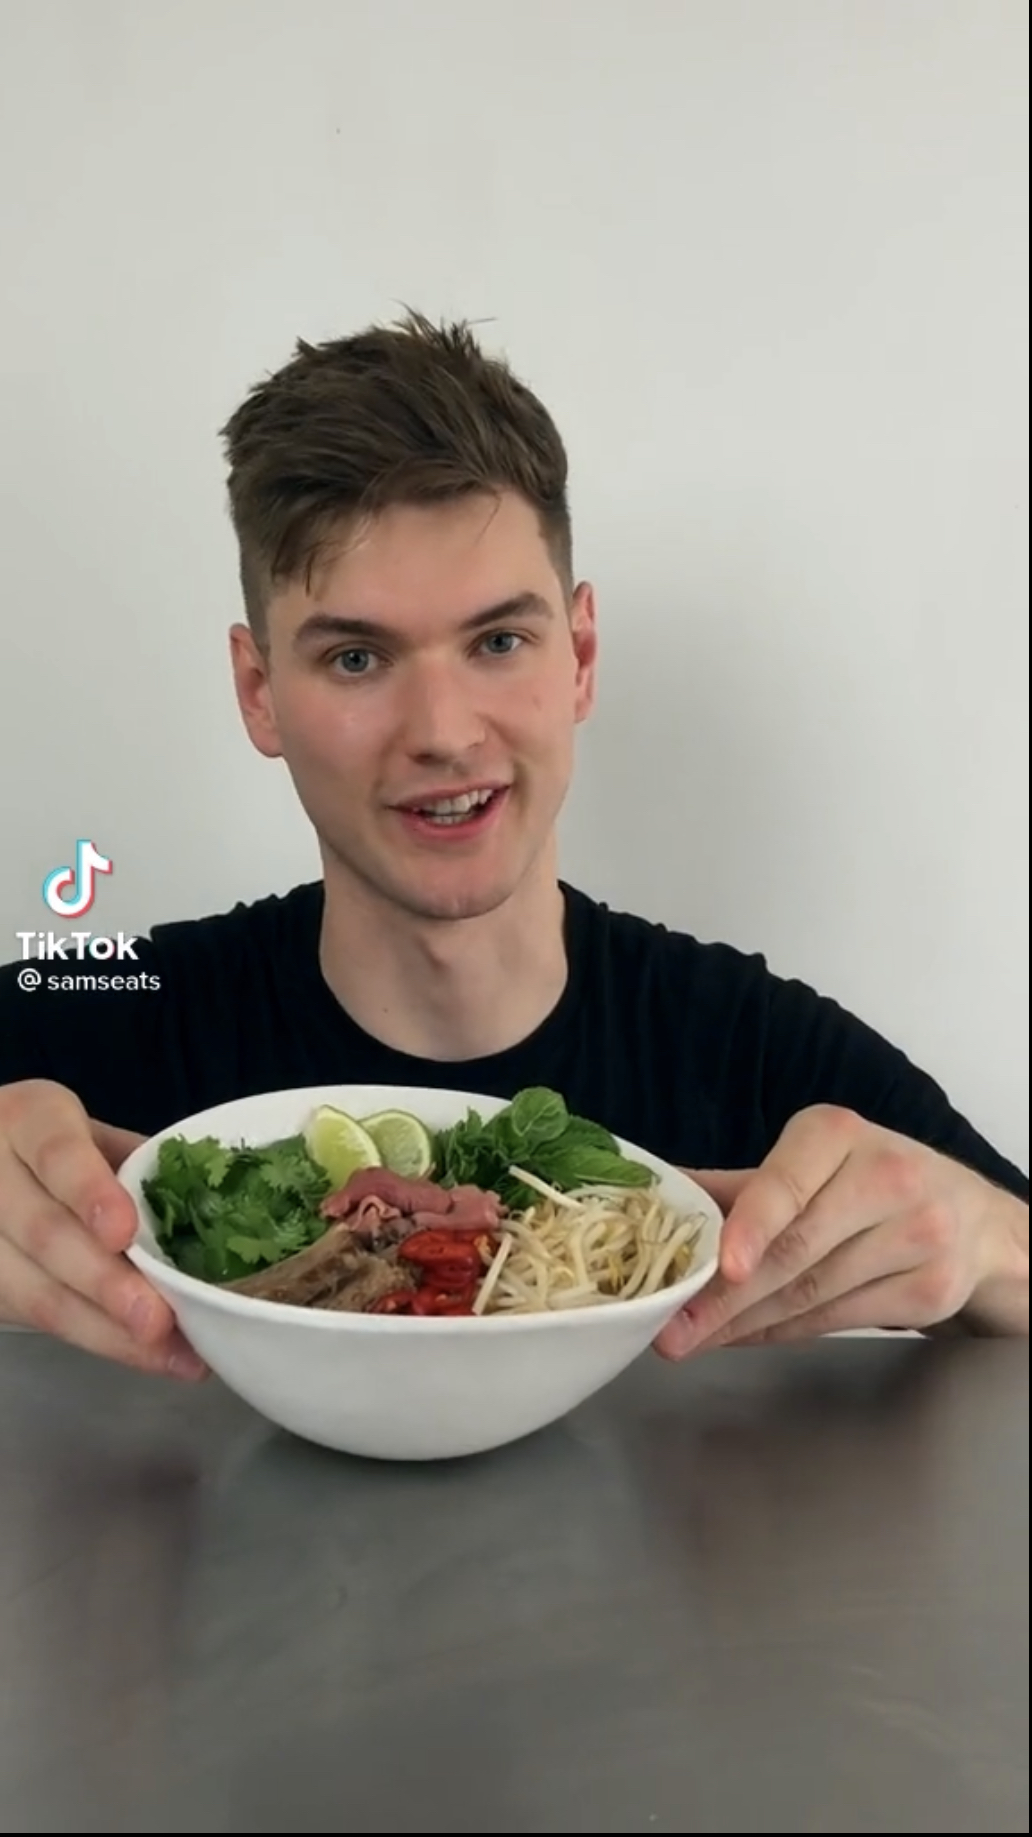 A screenshot shows Sam Way holding a bowl of Vietnamese pho he cooks in a video on his @samseats TikTok channel.